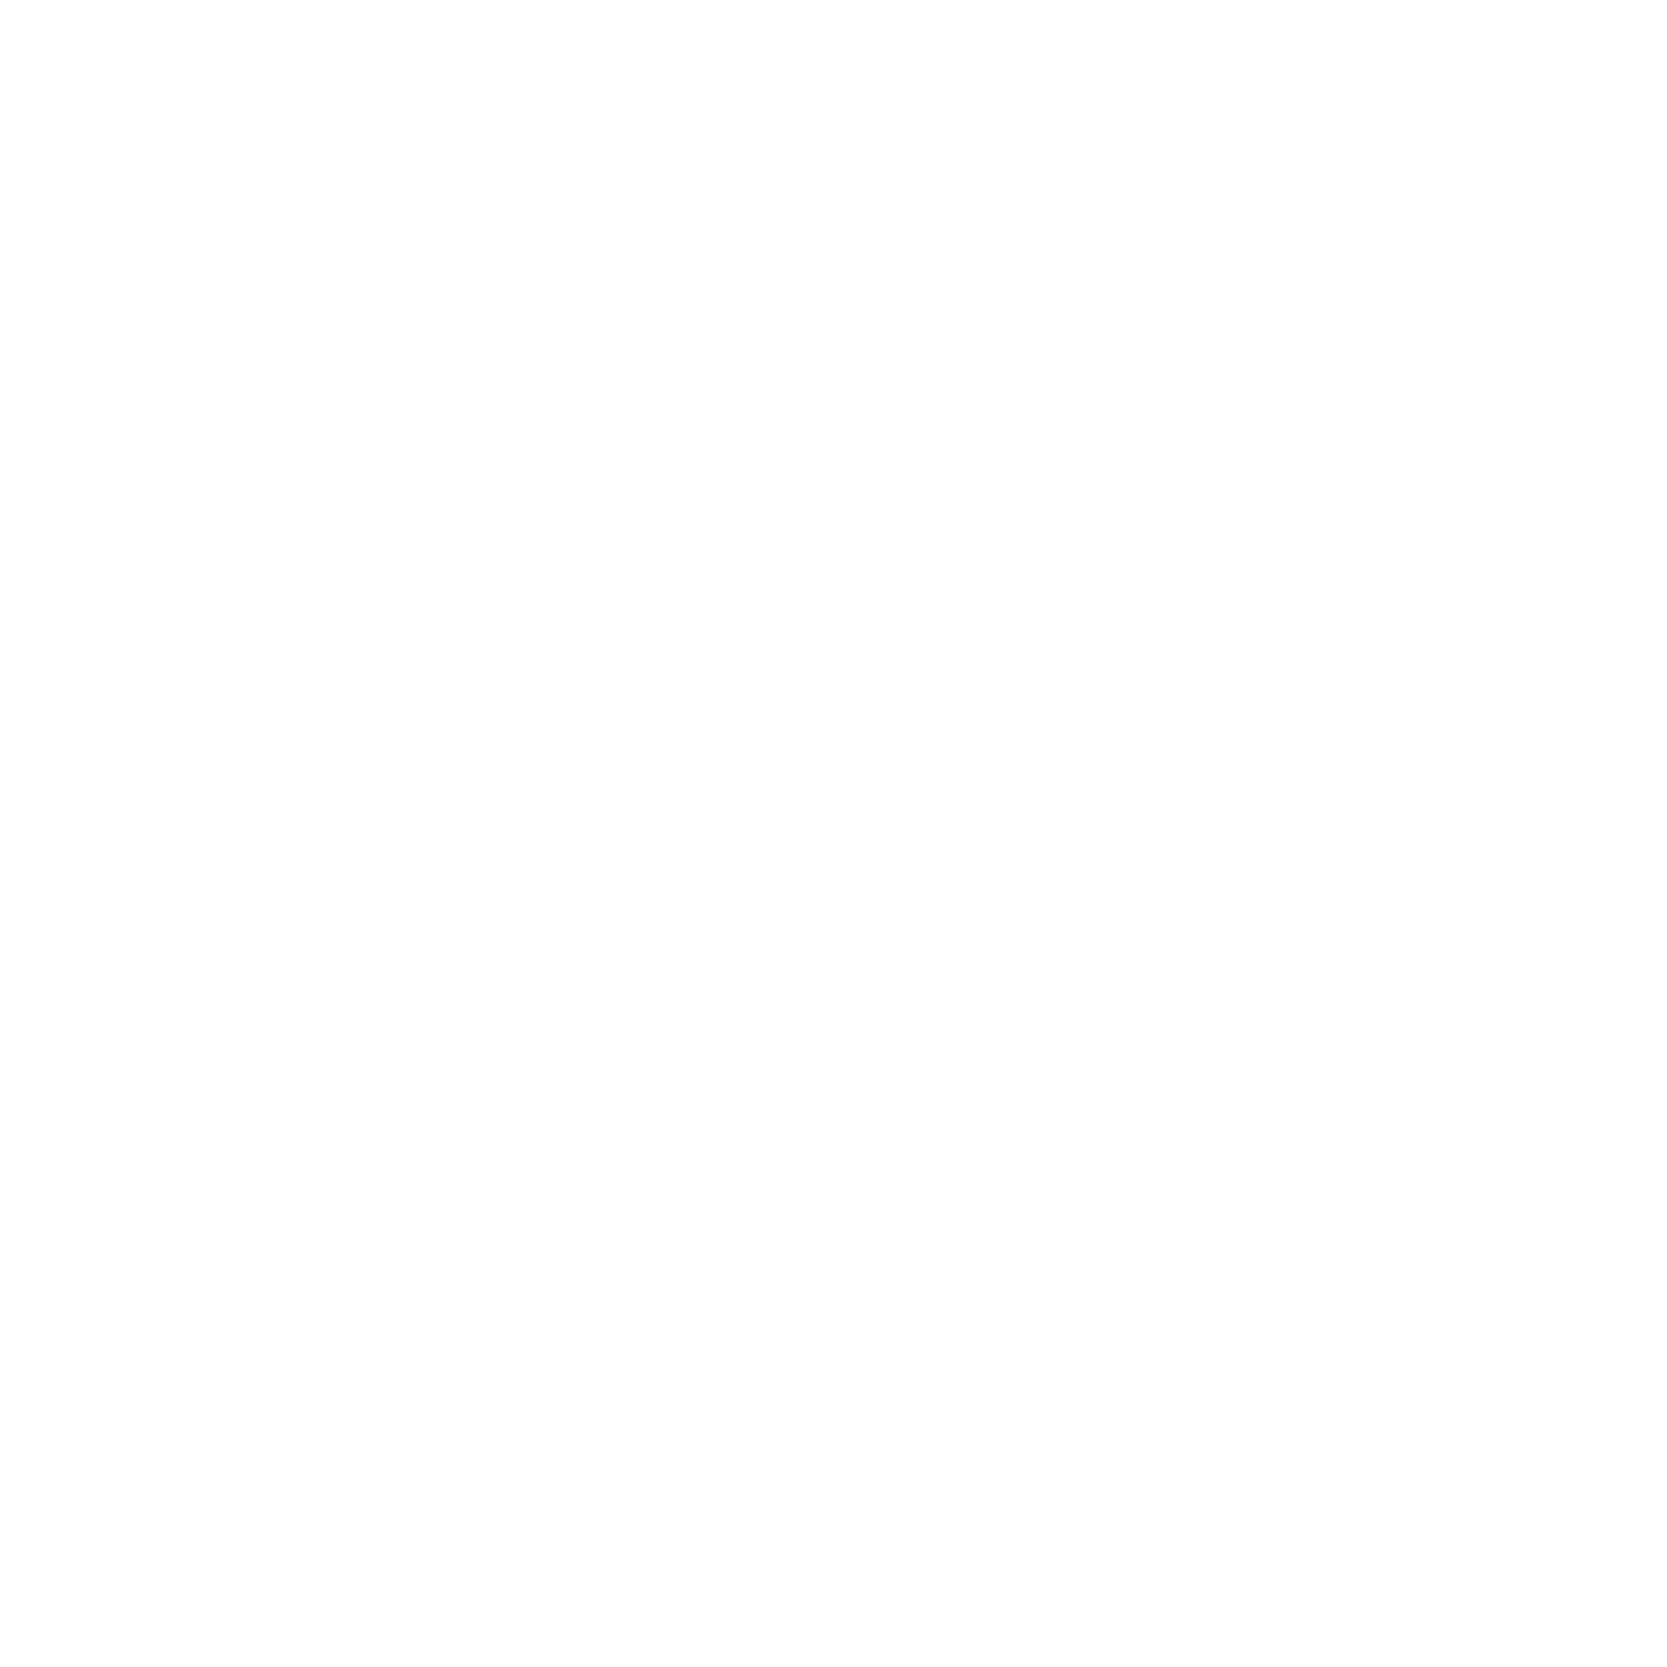 Saara automates inventory and consumer related processes for Supply chain and Retail businesses using computer vision.